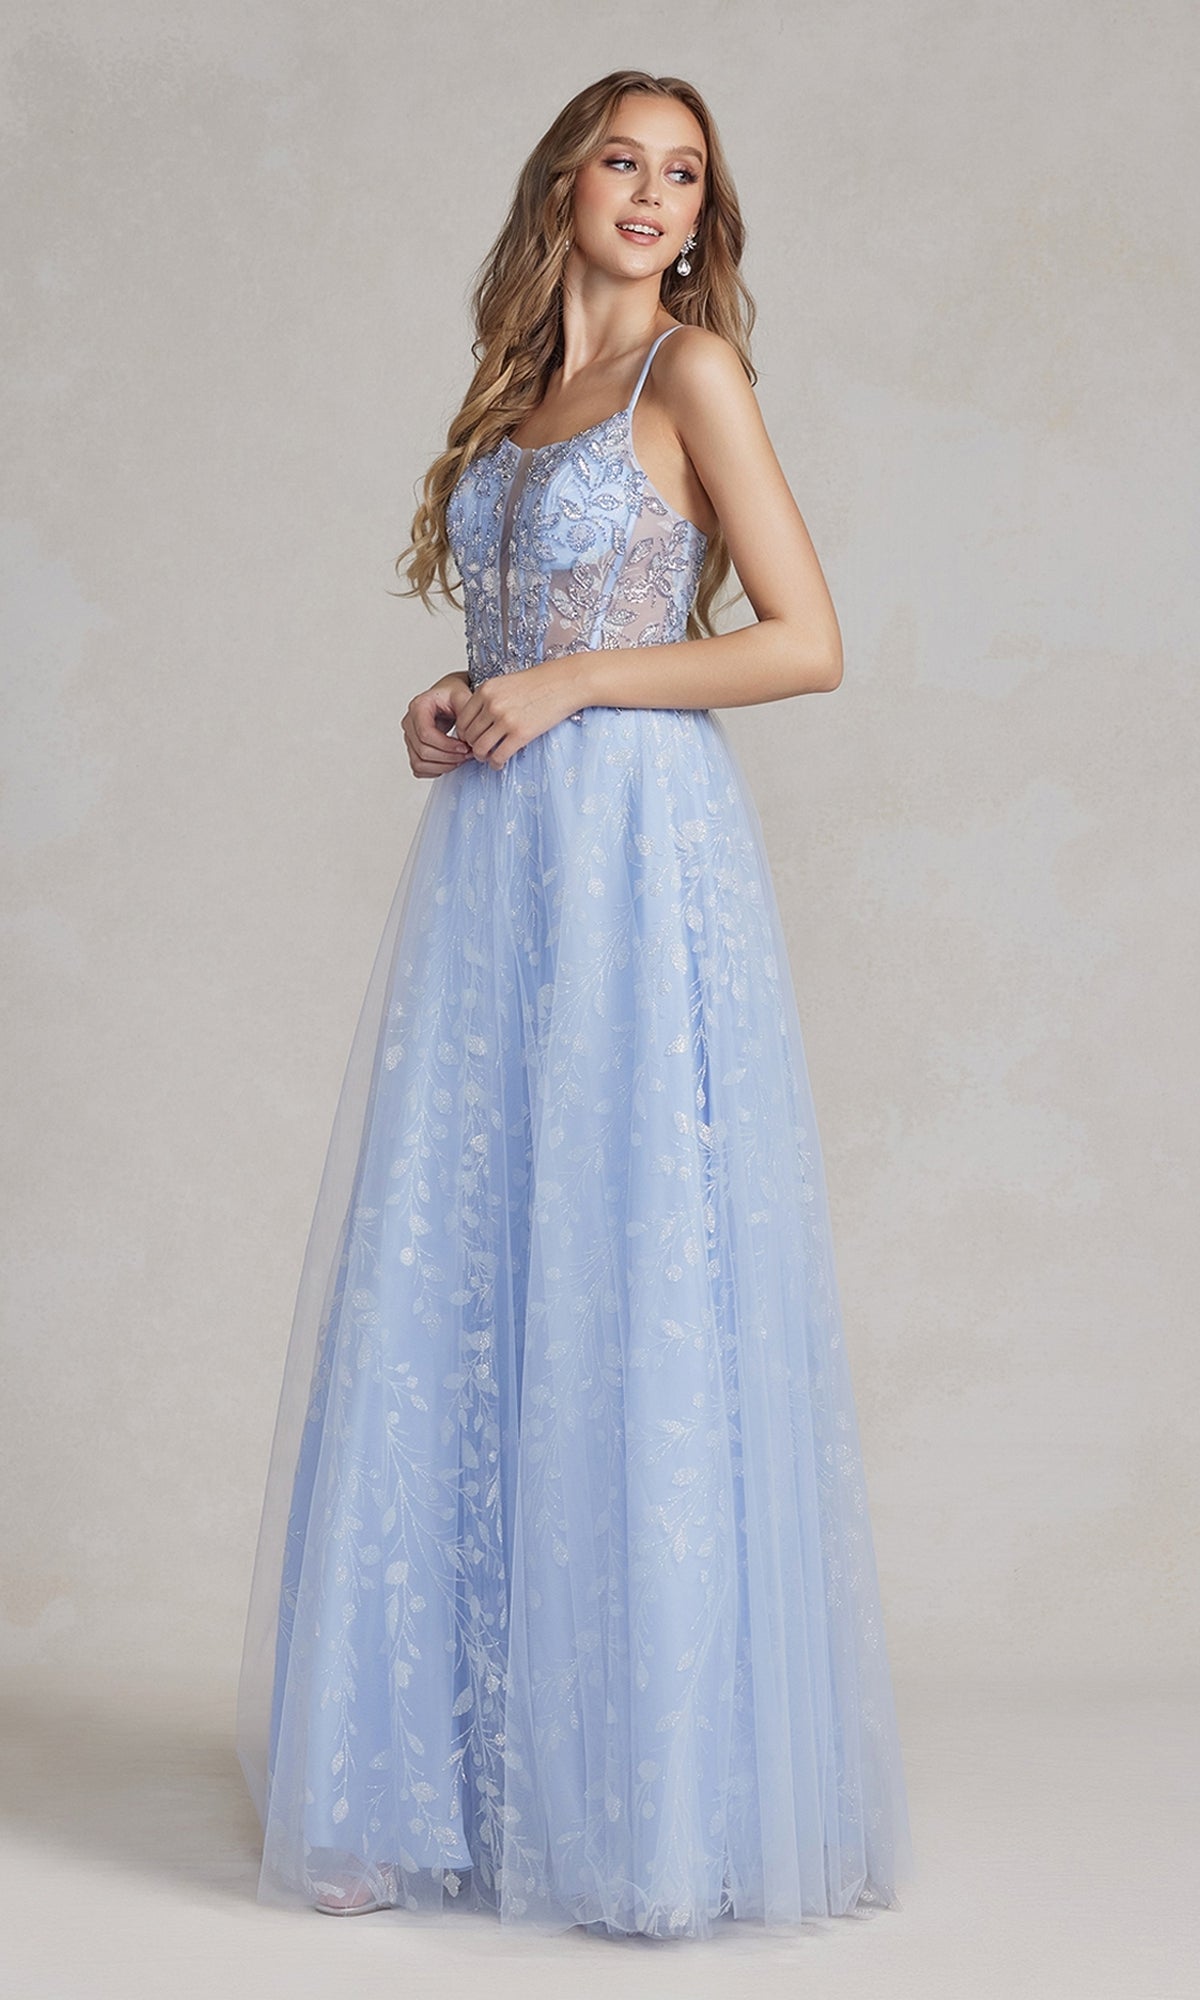  Periwinkle Sheer-Bodice Long A-Line Prom Dress